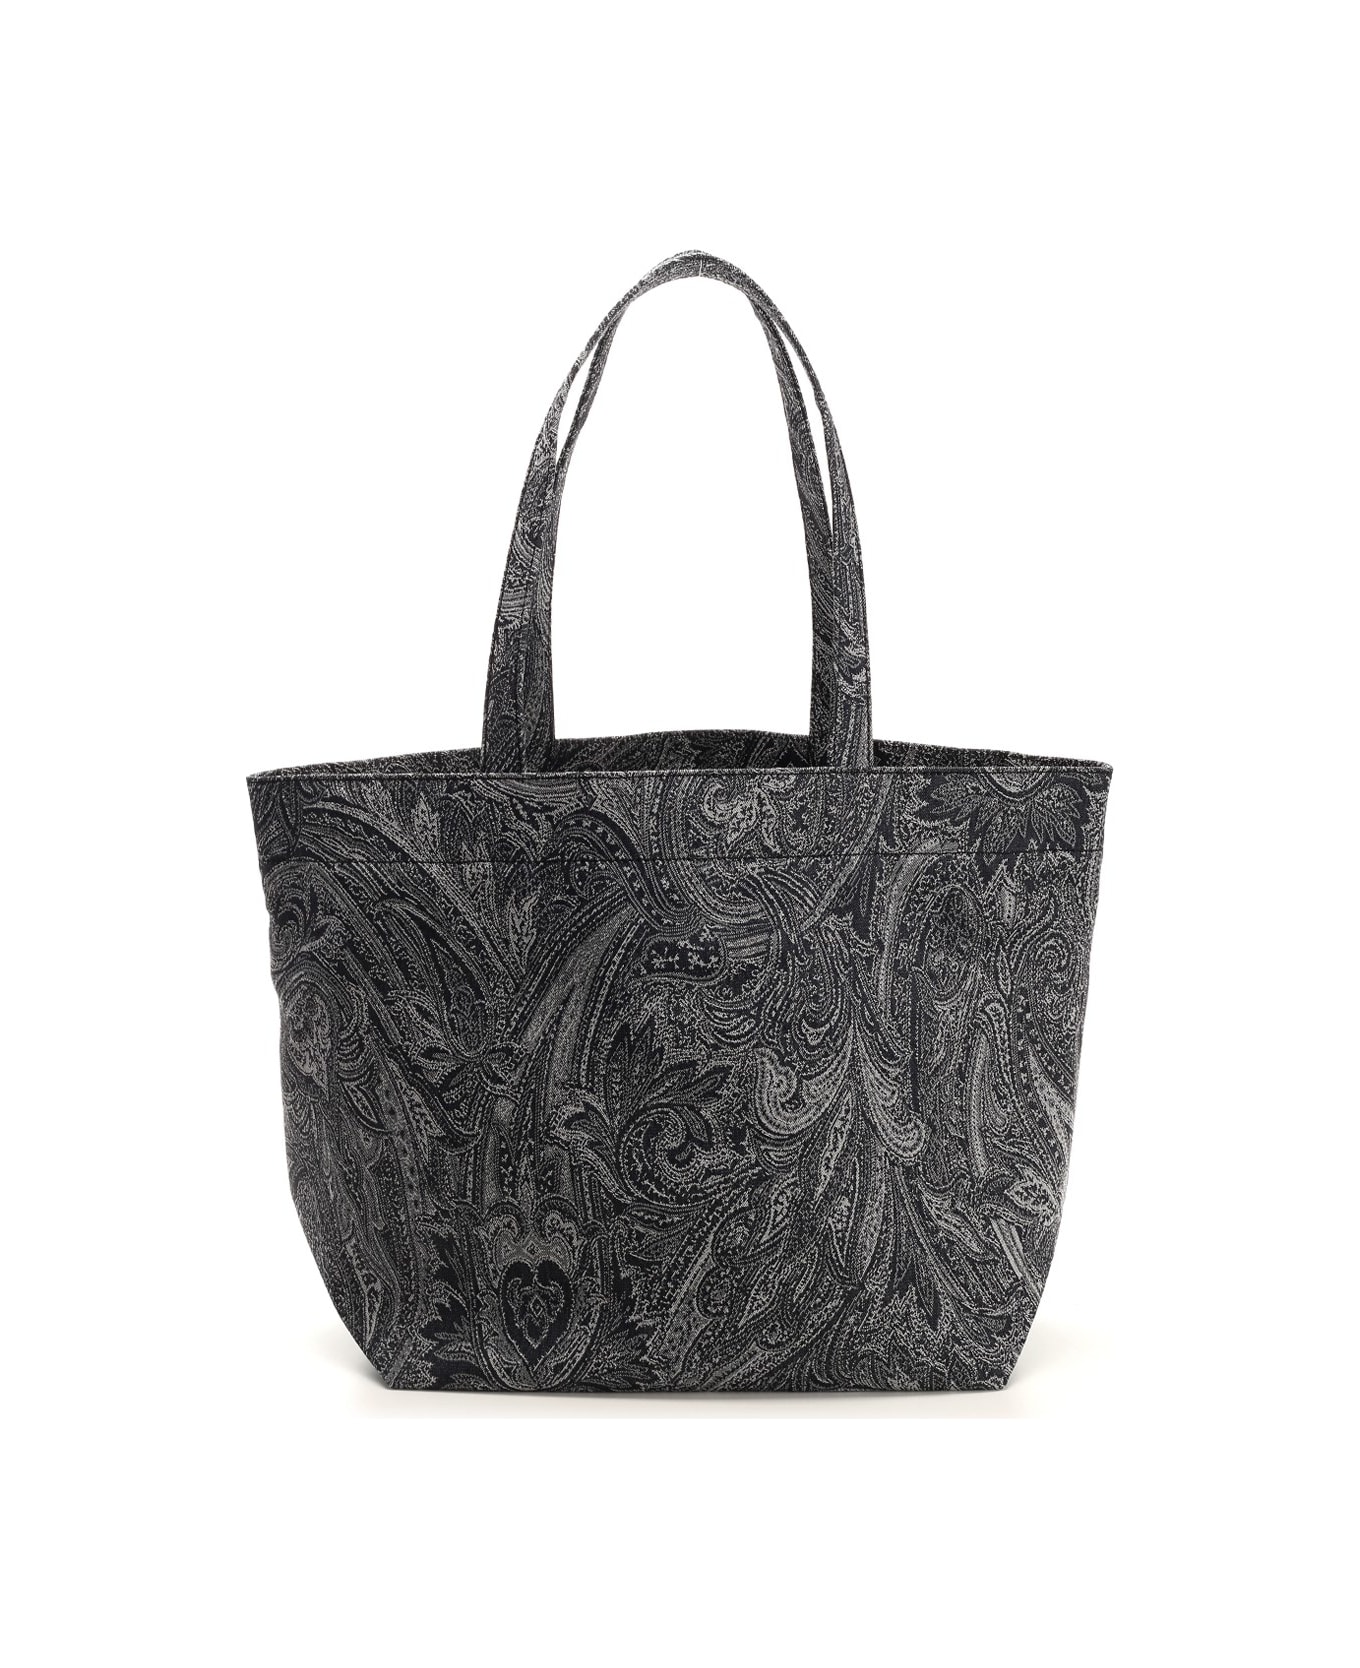 Etro Navy Blue Large Tote Bag With Paisley Jacquard Motif - Blue